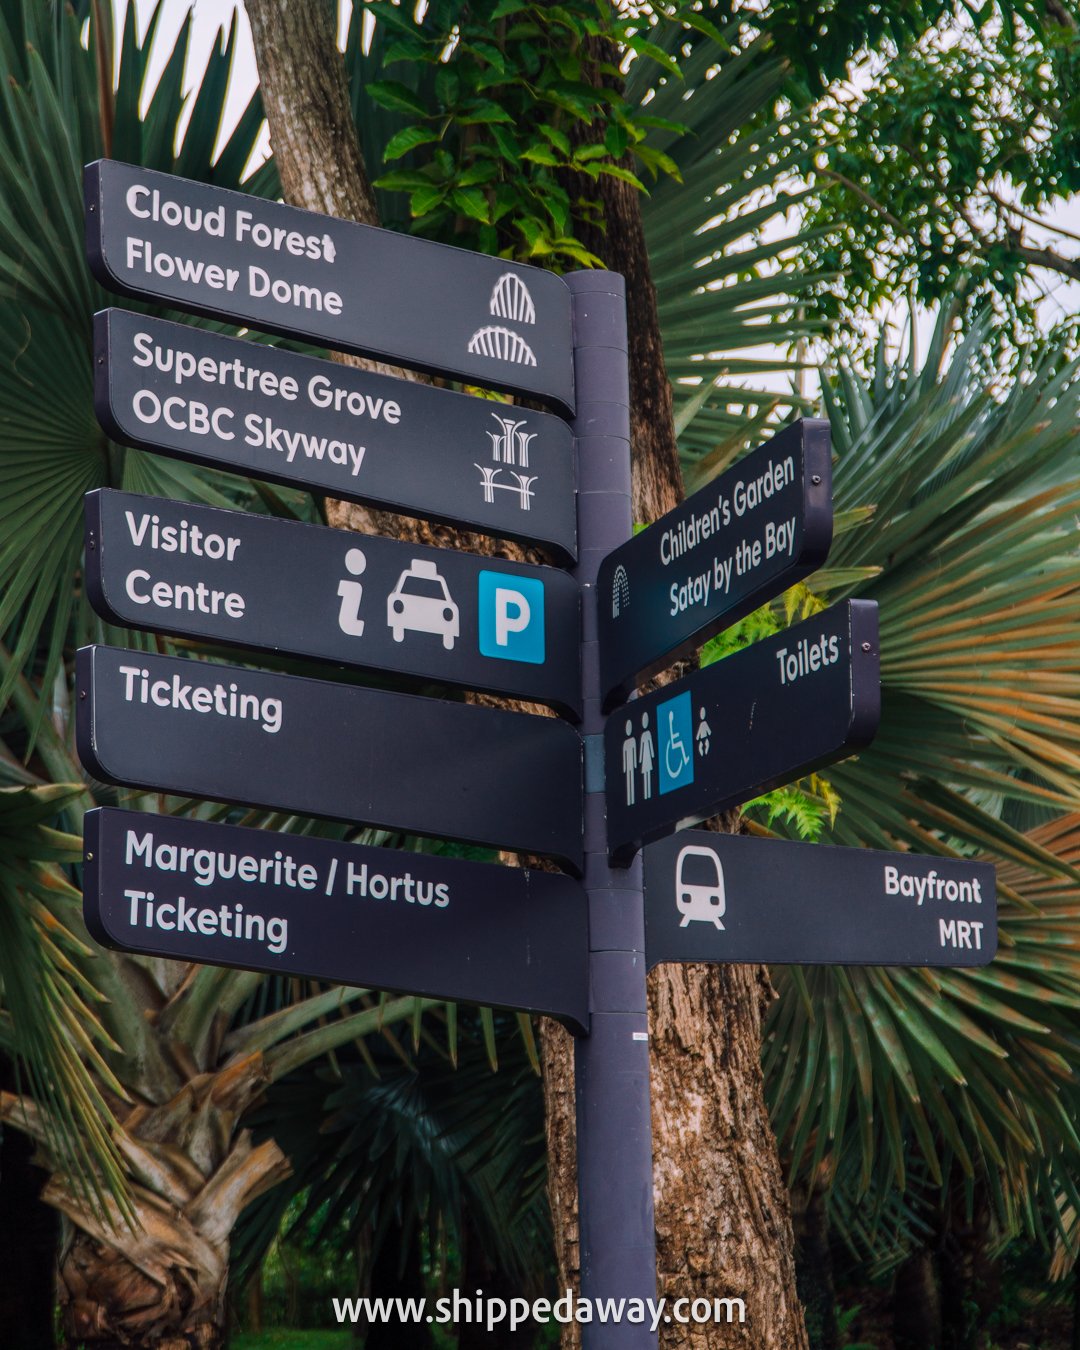 How to get to Gardens by the Bay in Singapore